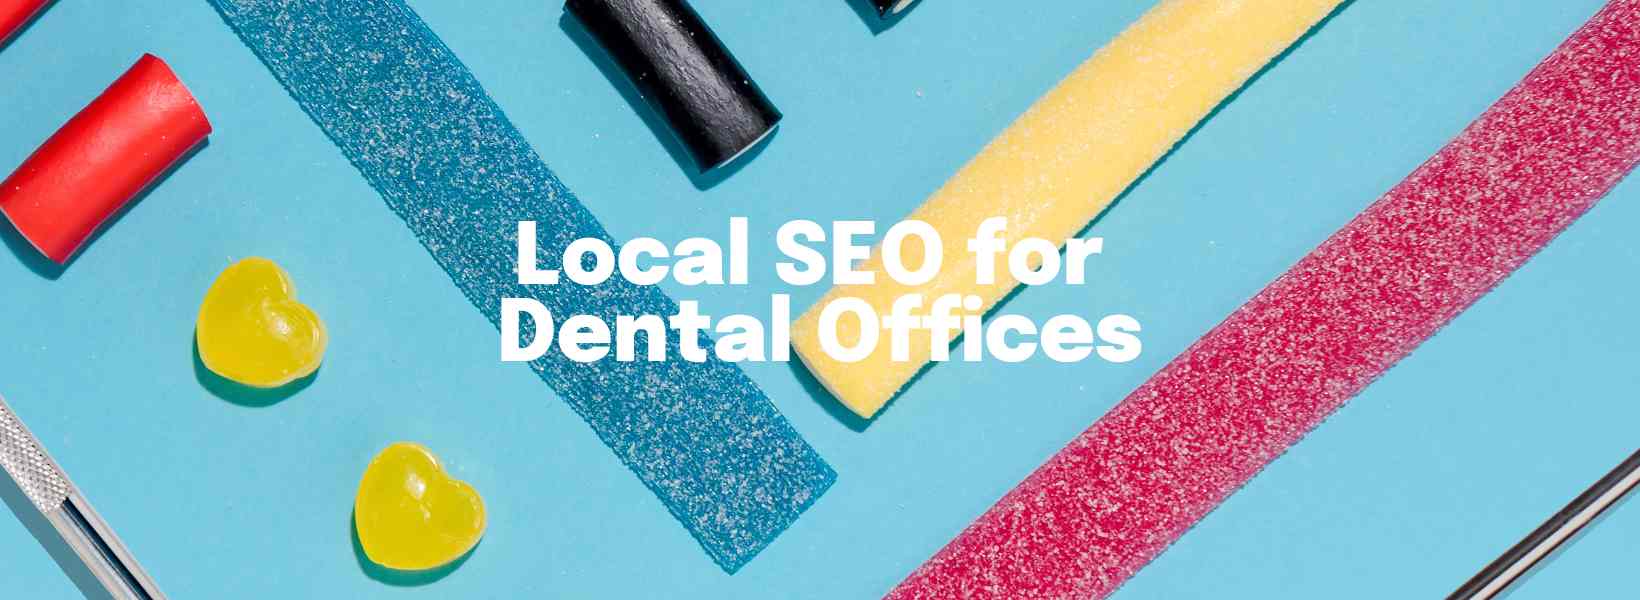 Local SEO for Dental Offices